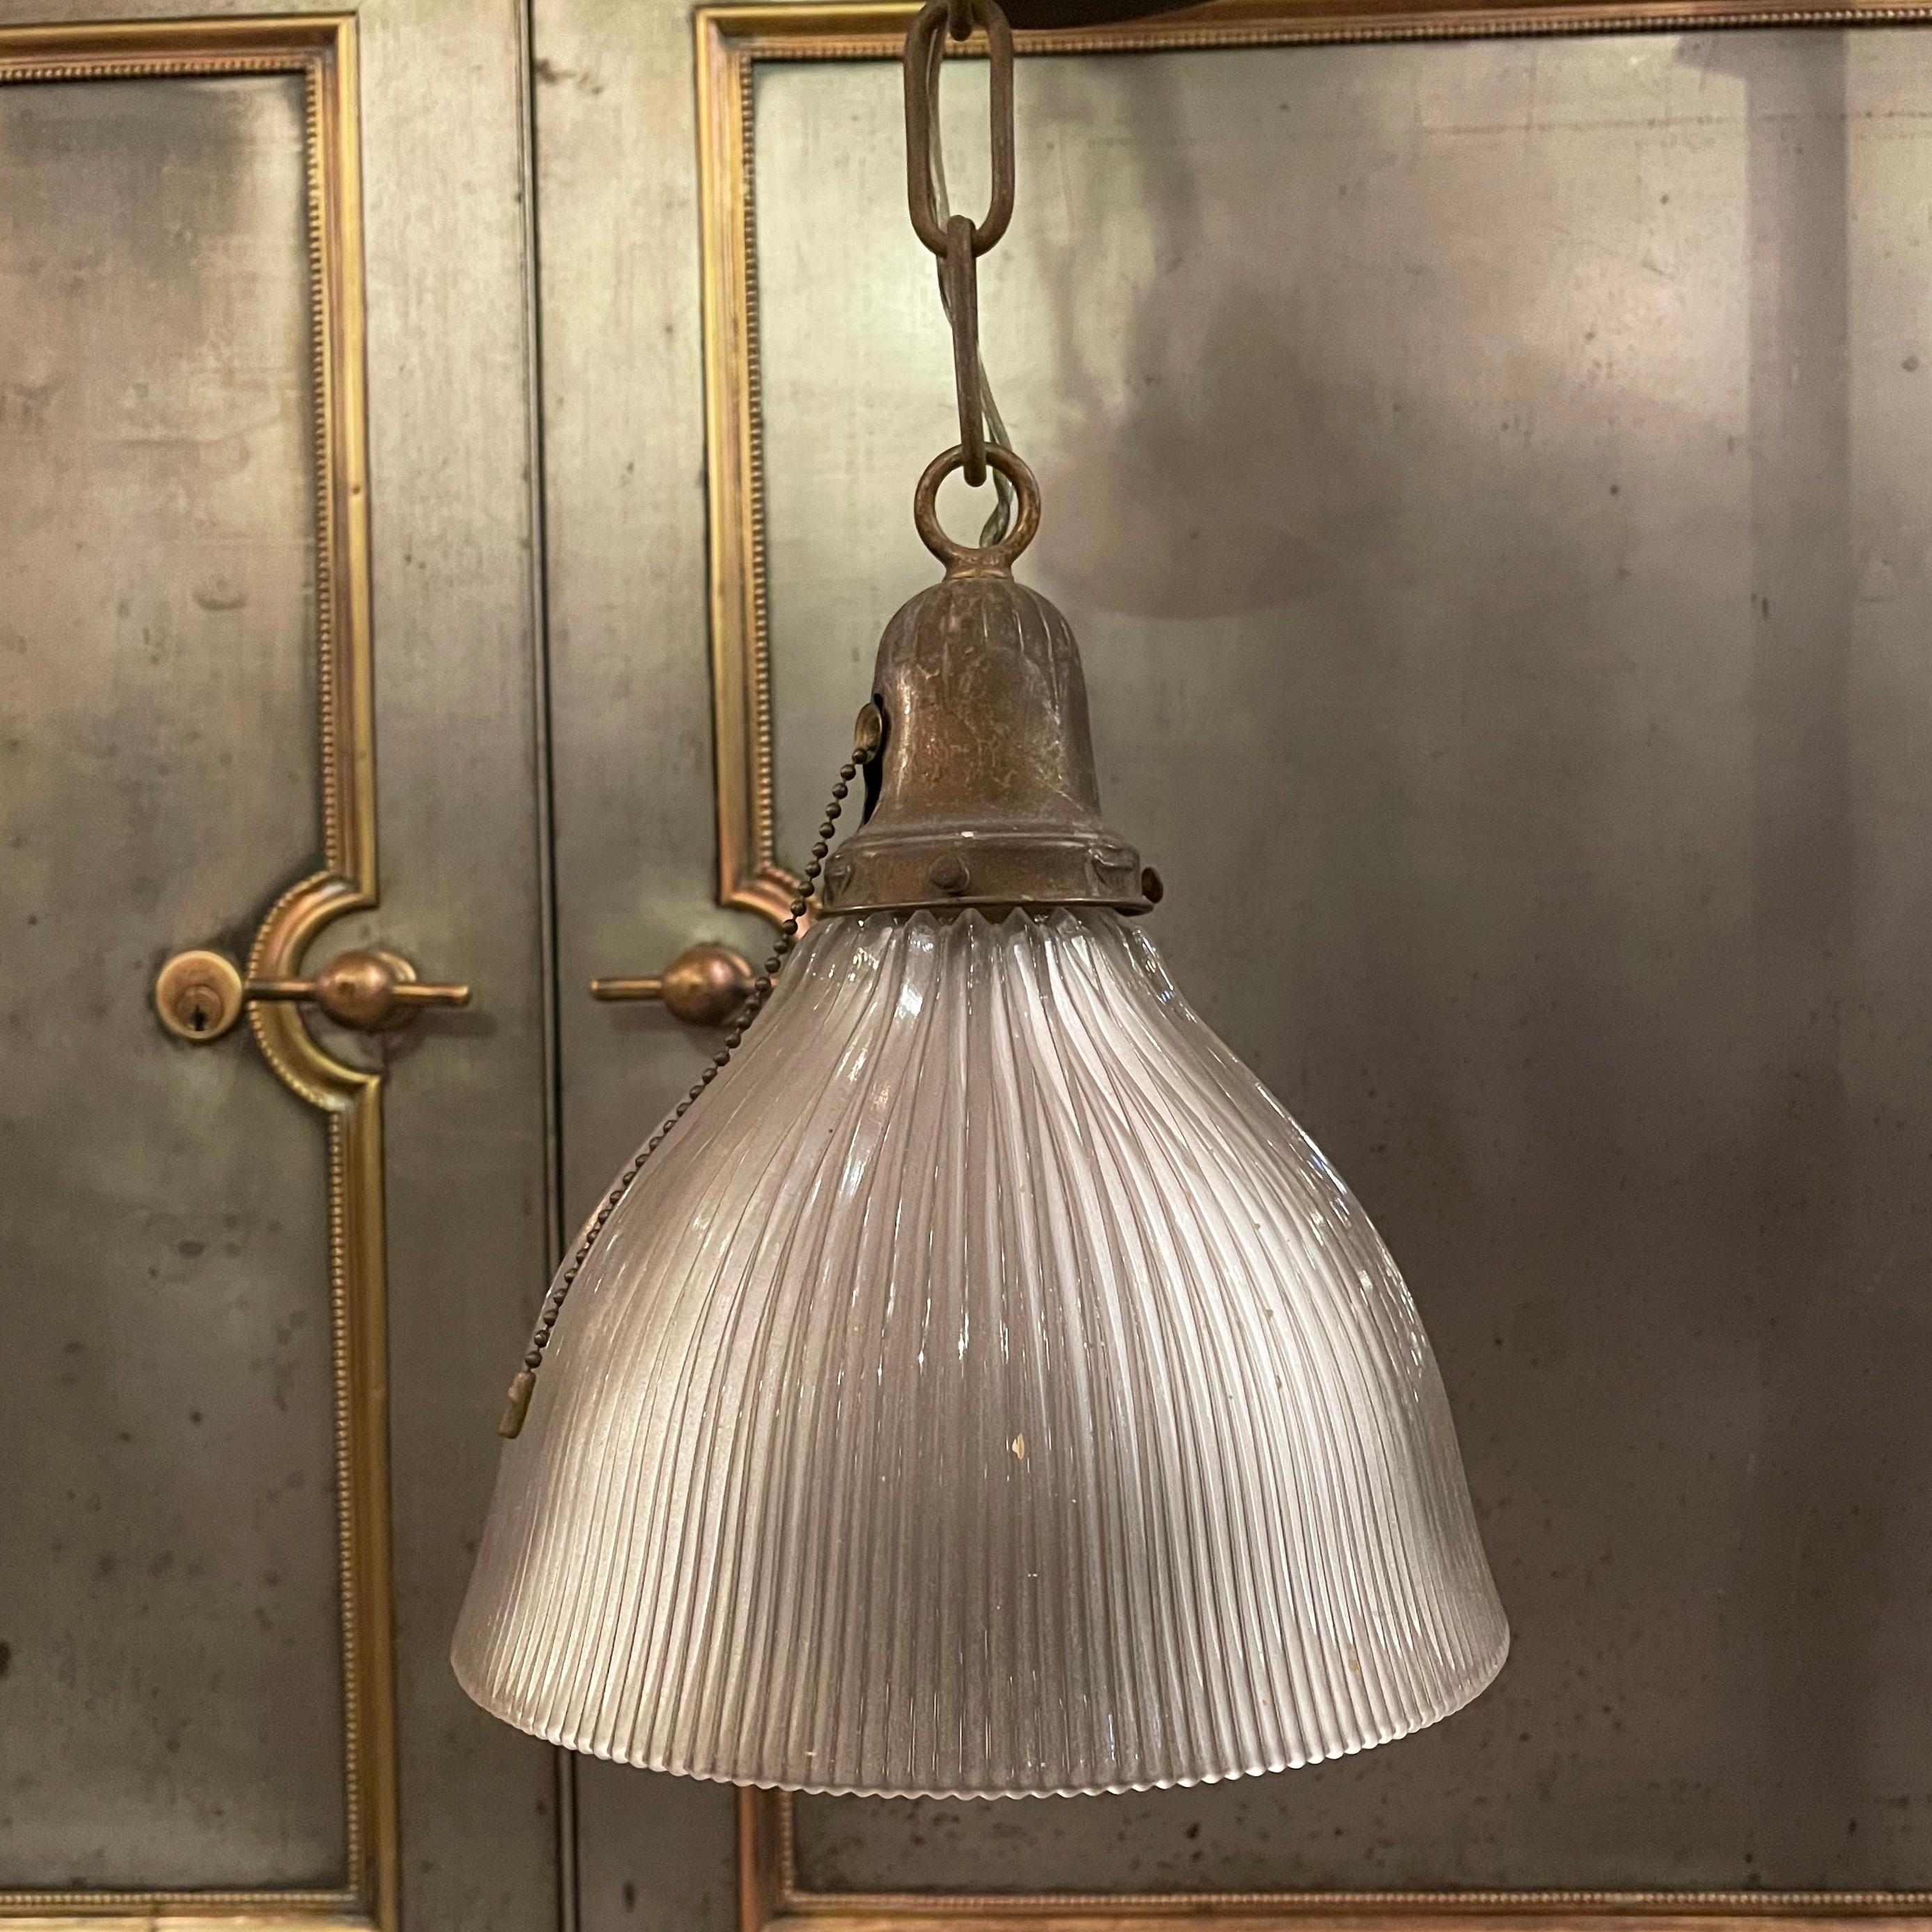 Early 20th Century Industrial Cut Glass Dome Pendant Light In Good Condition For Sale In Brooklyn, NY